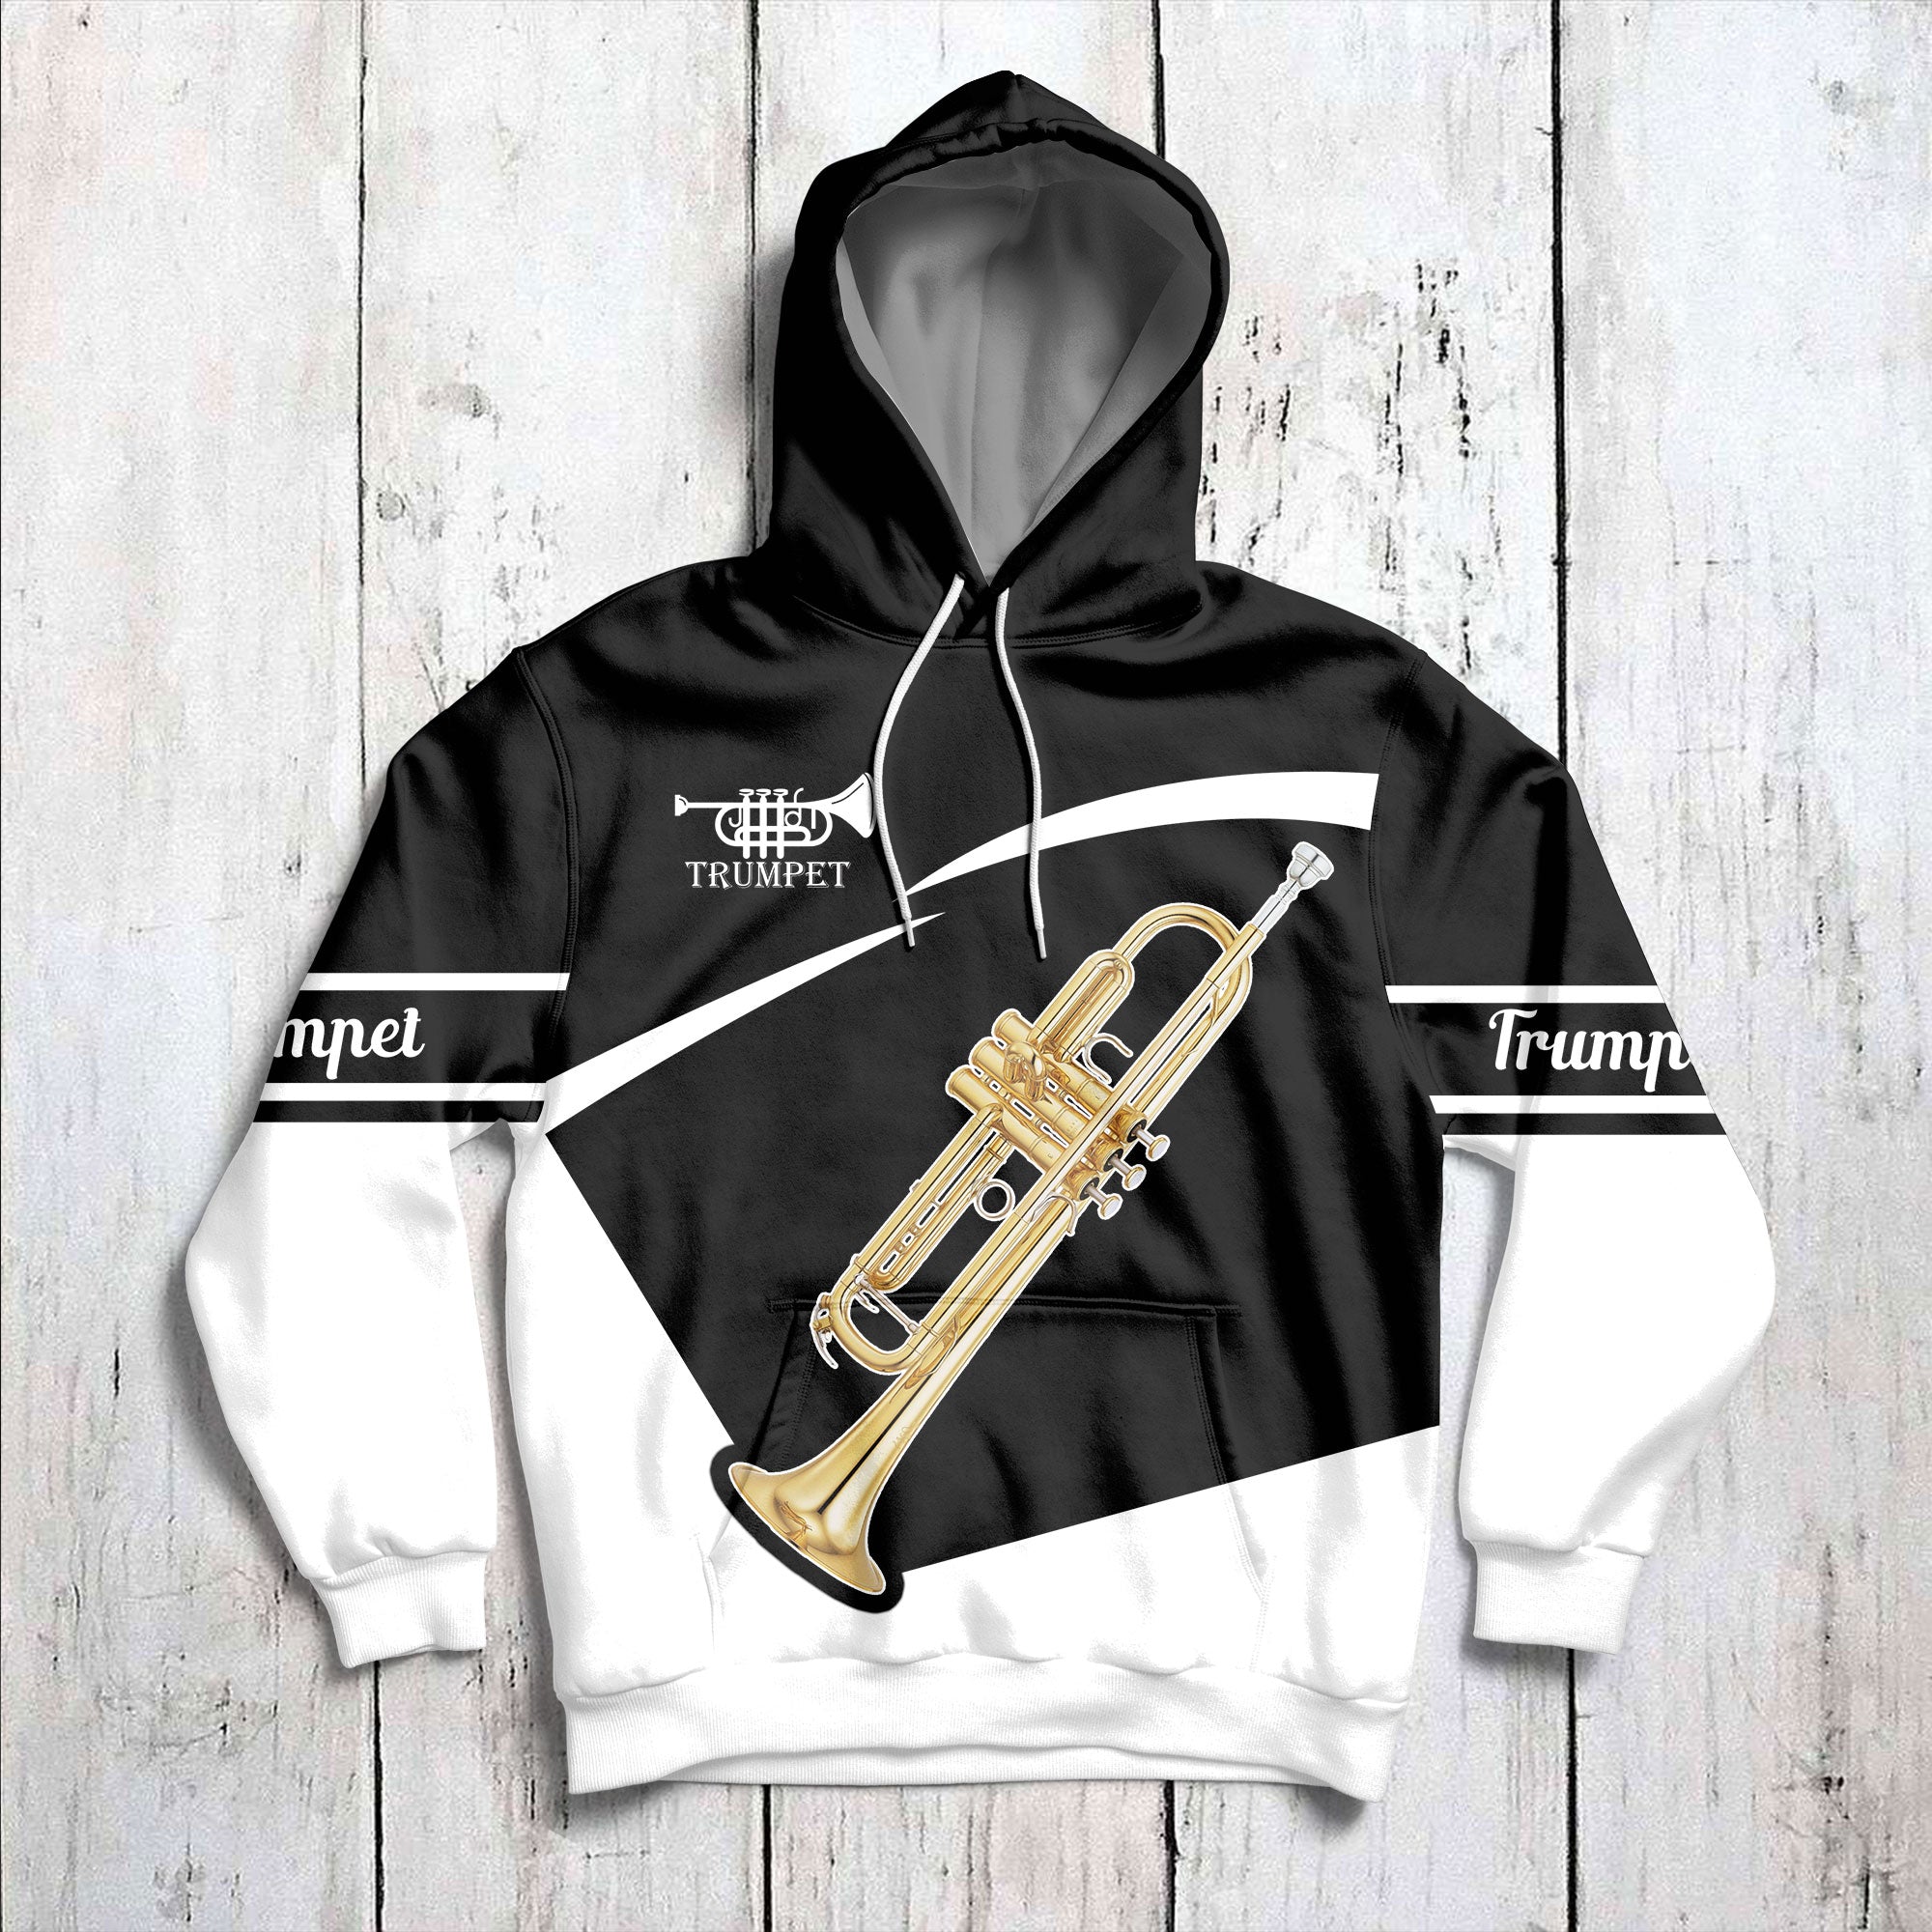 Trumpet Black White Pullover Premium Hoodie, Perfect Outfit For Men And Women On Christmas New Year Autumn Winter